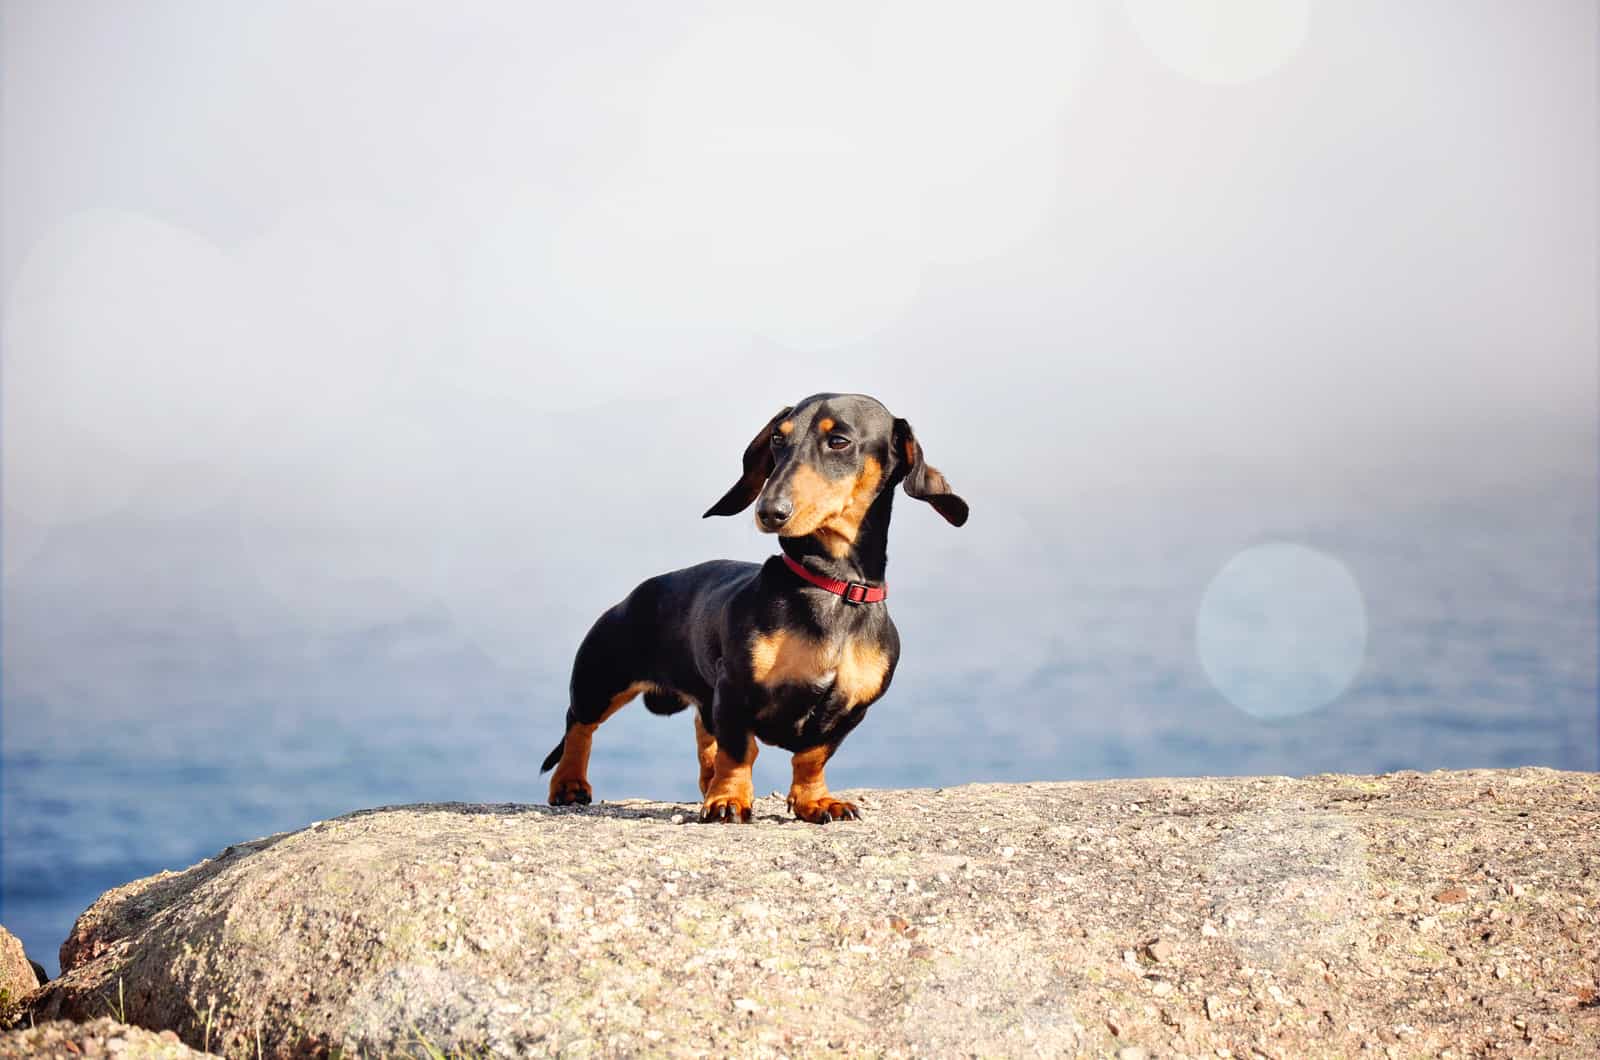 the dachshund stands on a rock and looks around